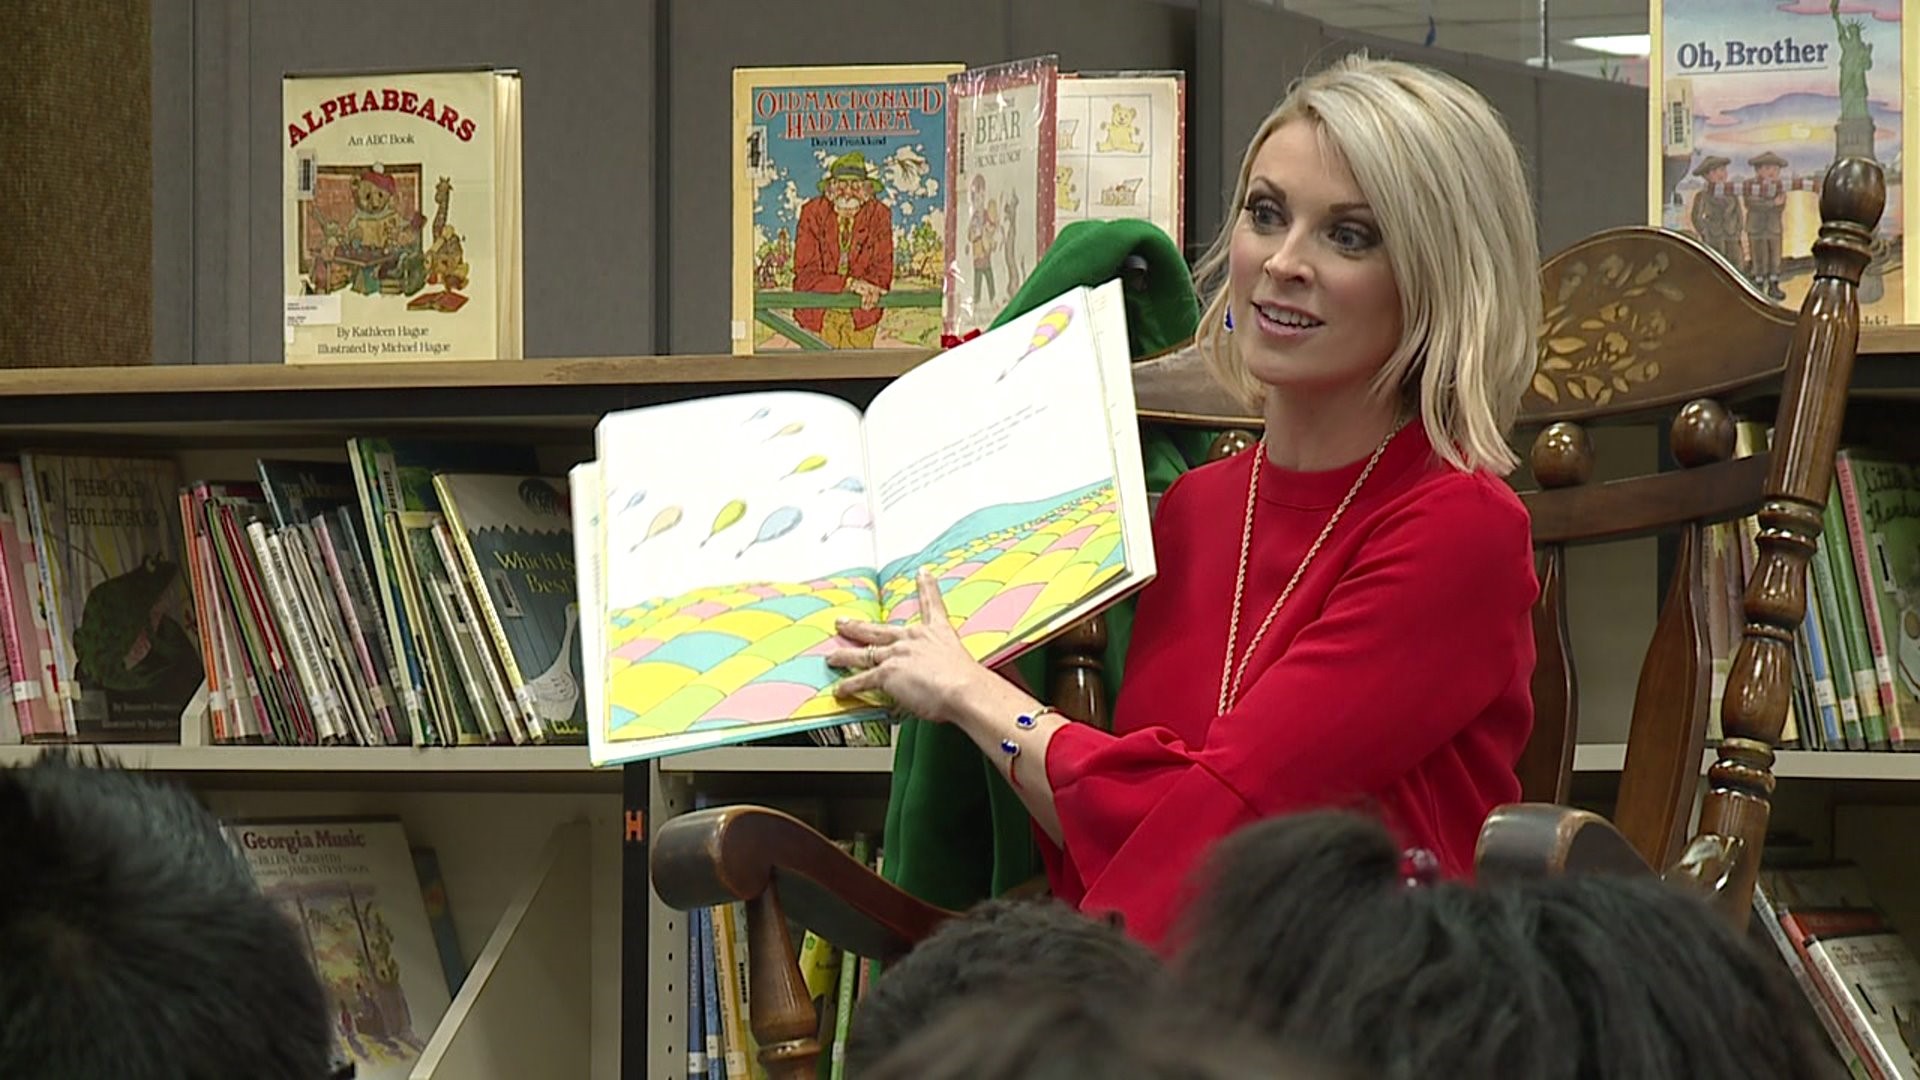 Sharla Reads to Students